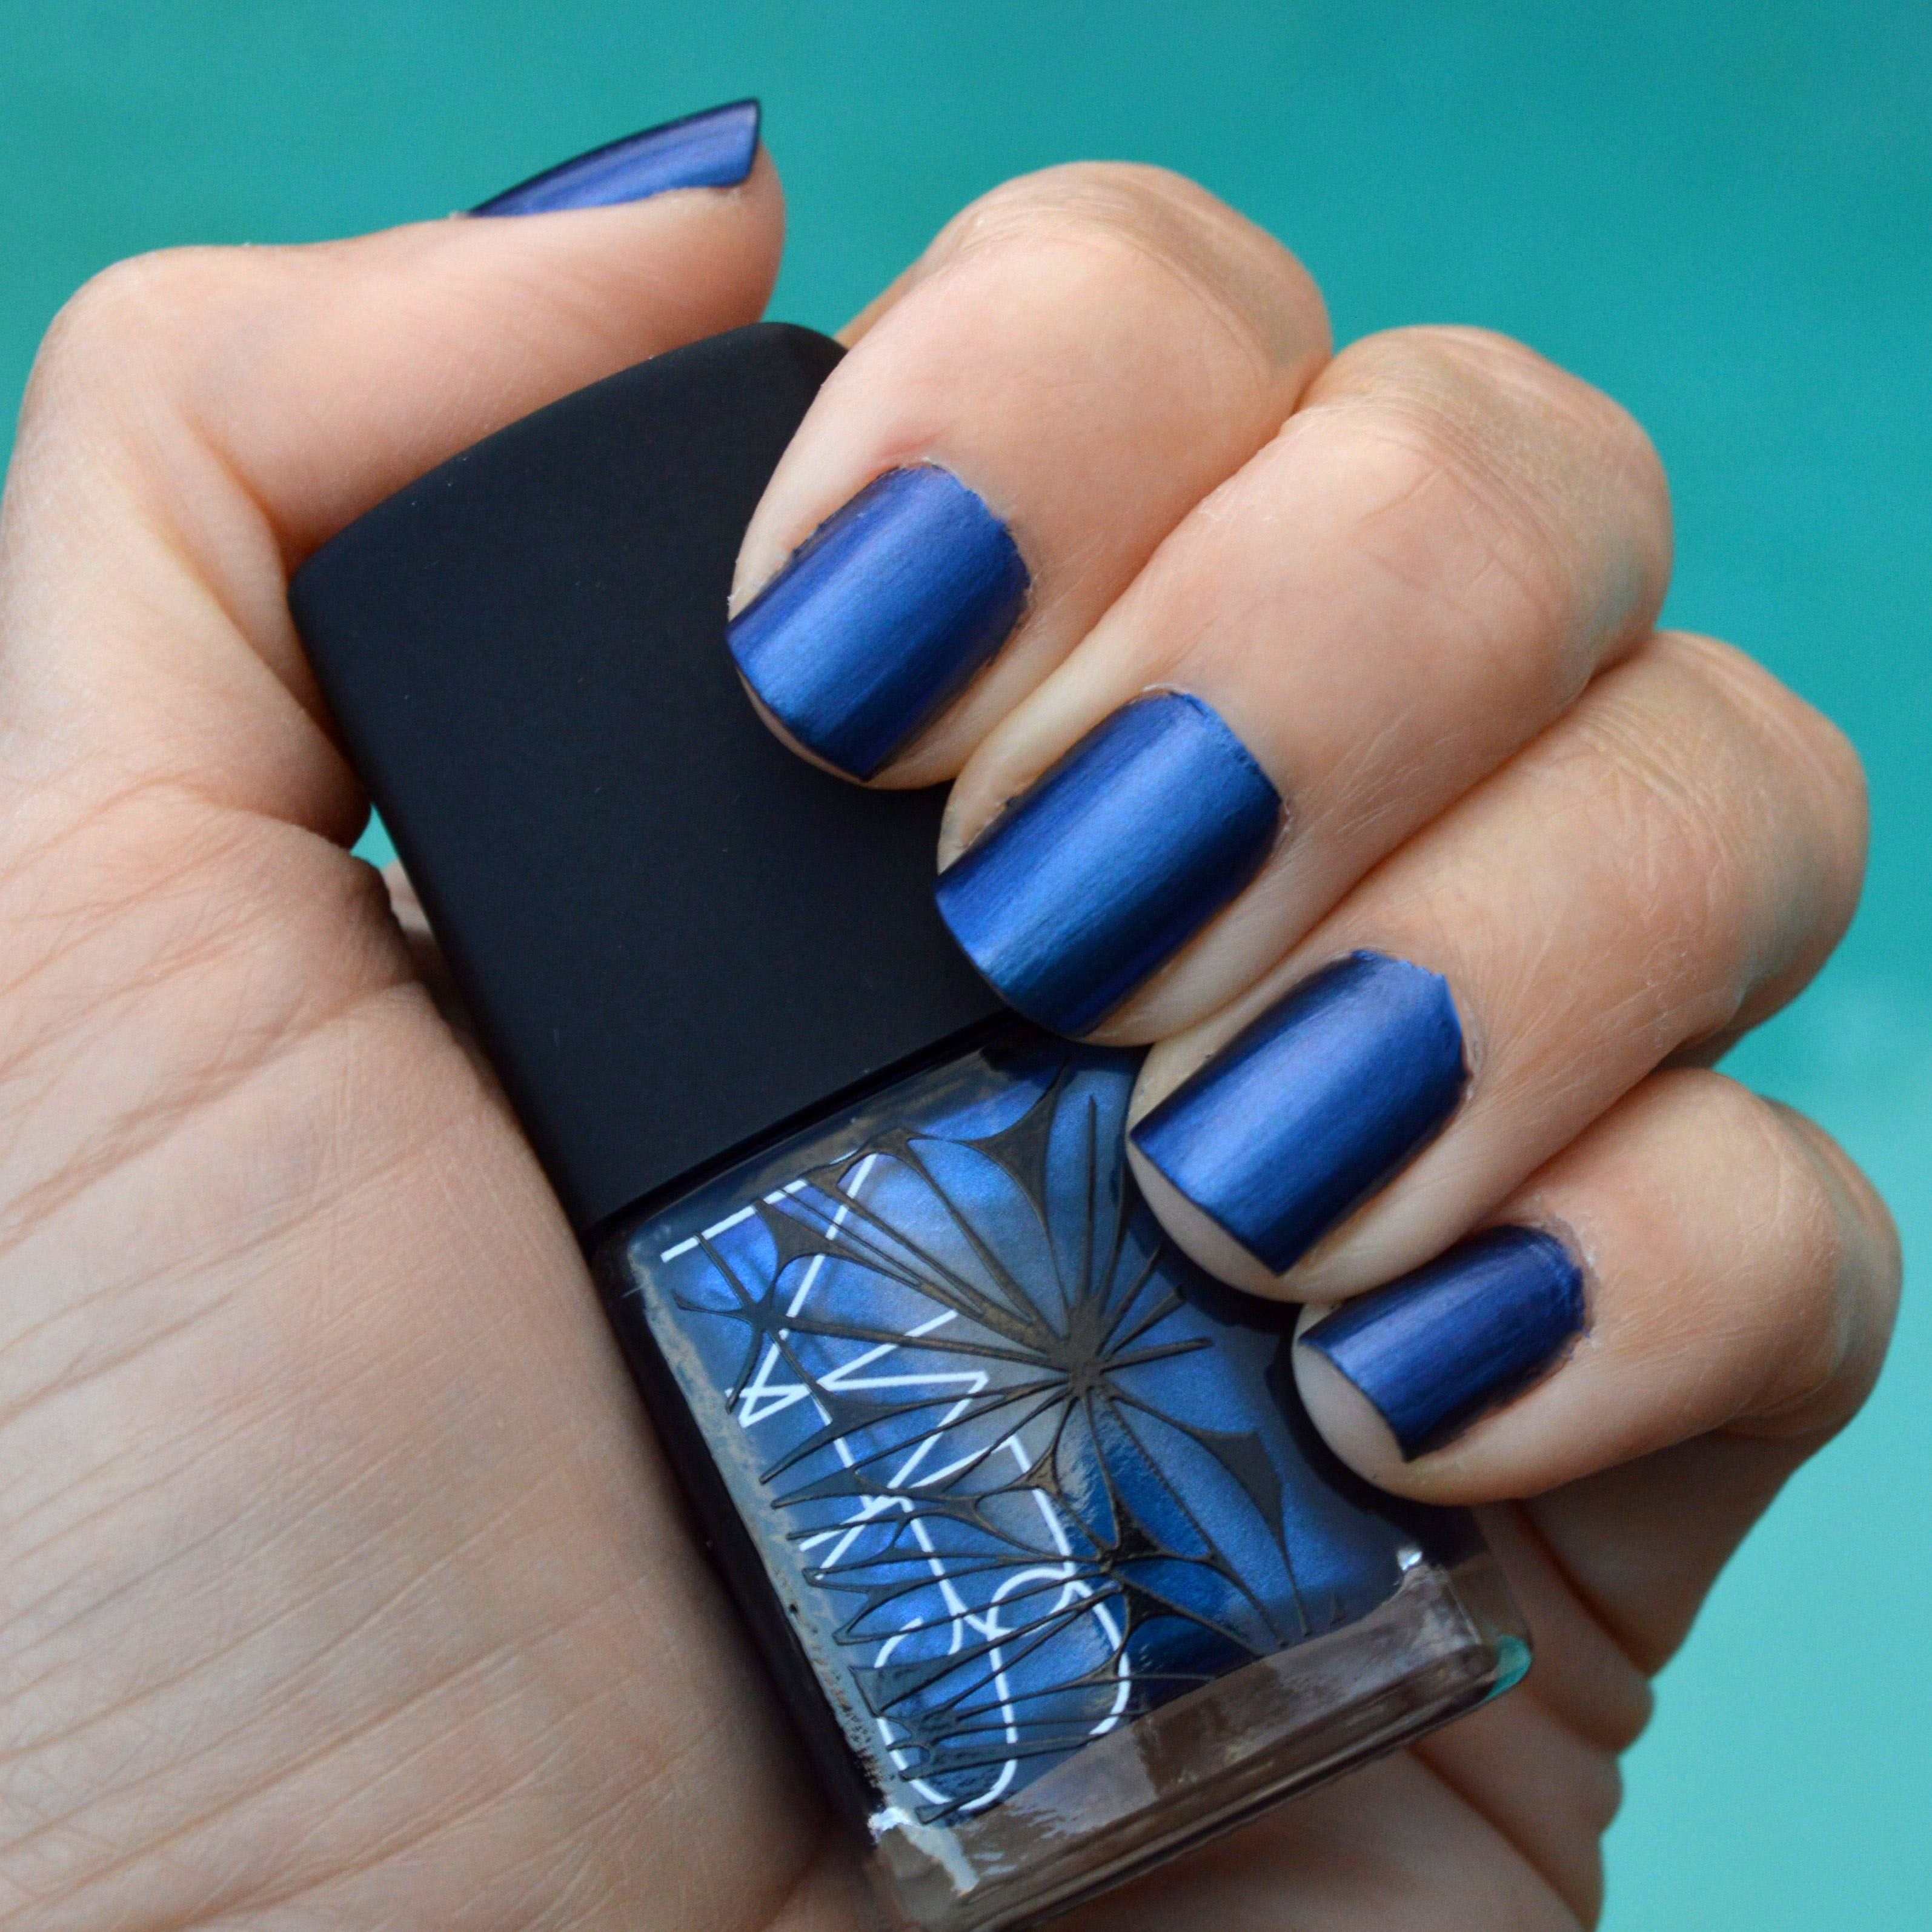 Pictured: Nars Barents Sea nail polish for winter 2015